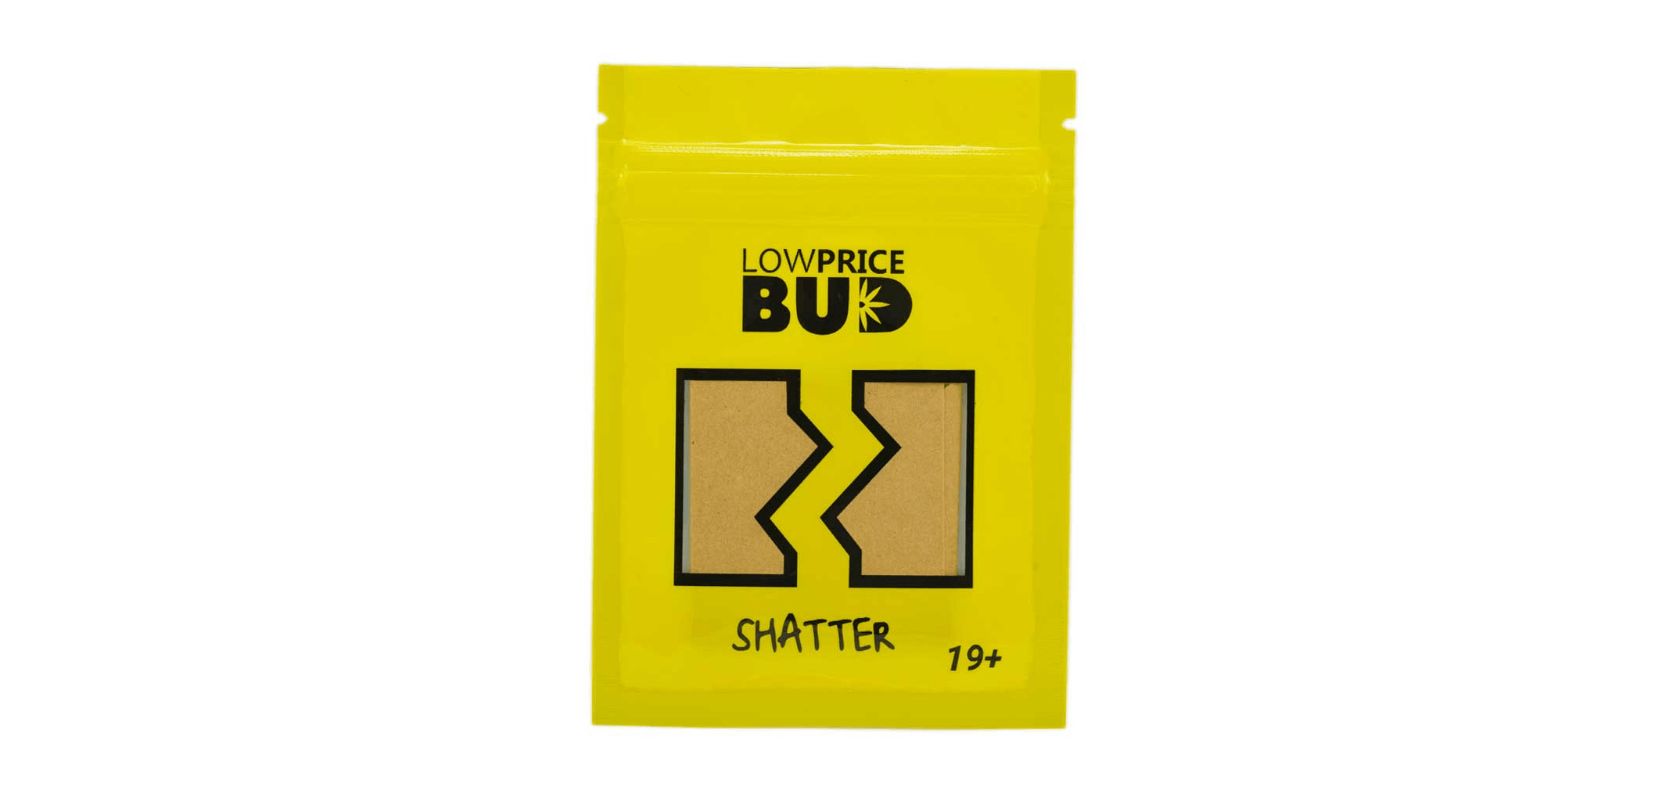 One of the most popular shatter THC strains is OG Kush. OG Kush is a classic and one of the most sought-after strains in the world.